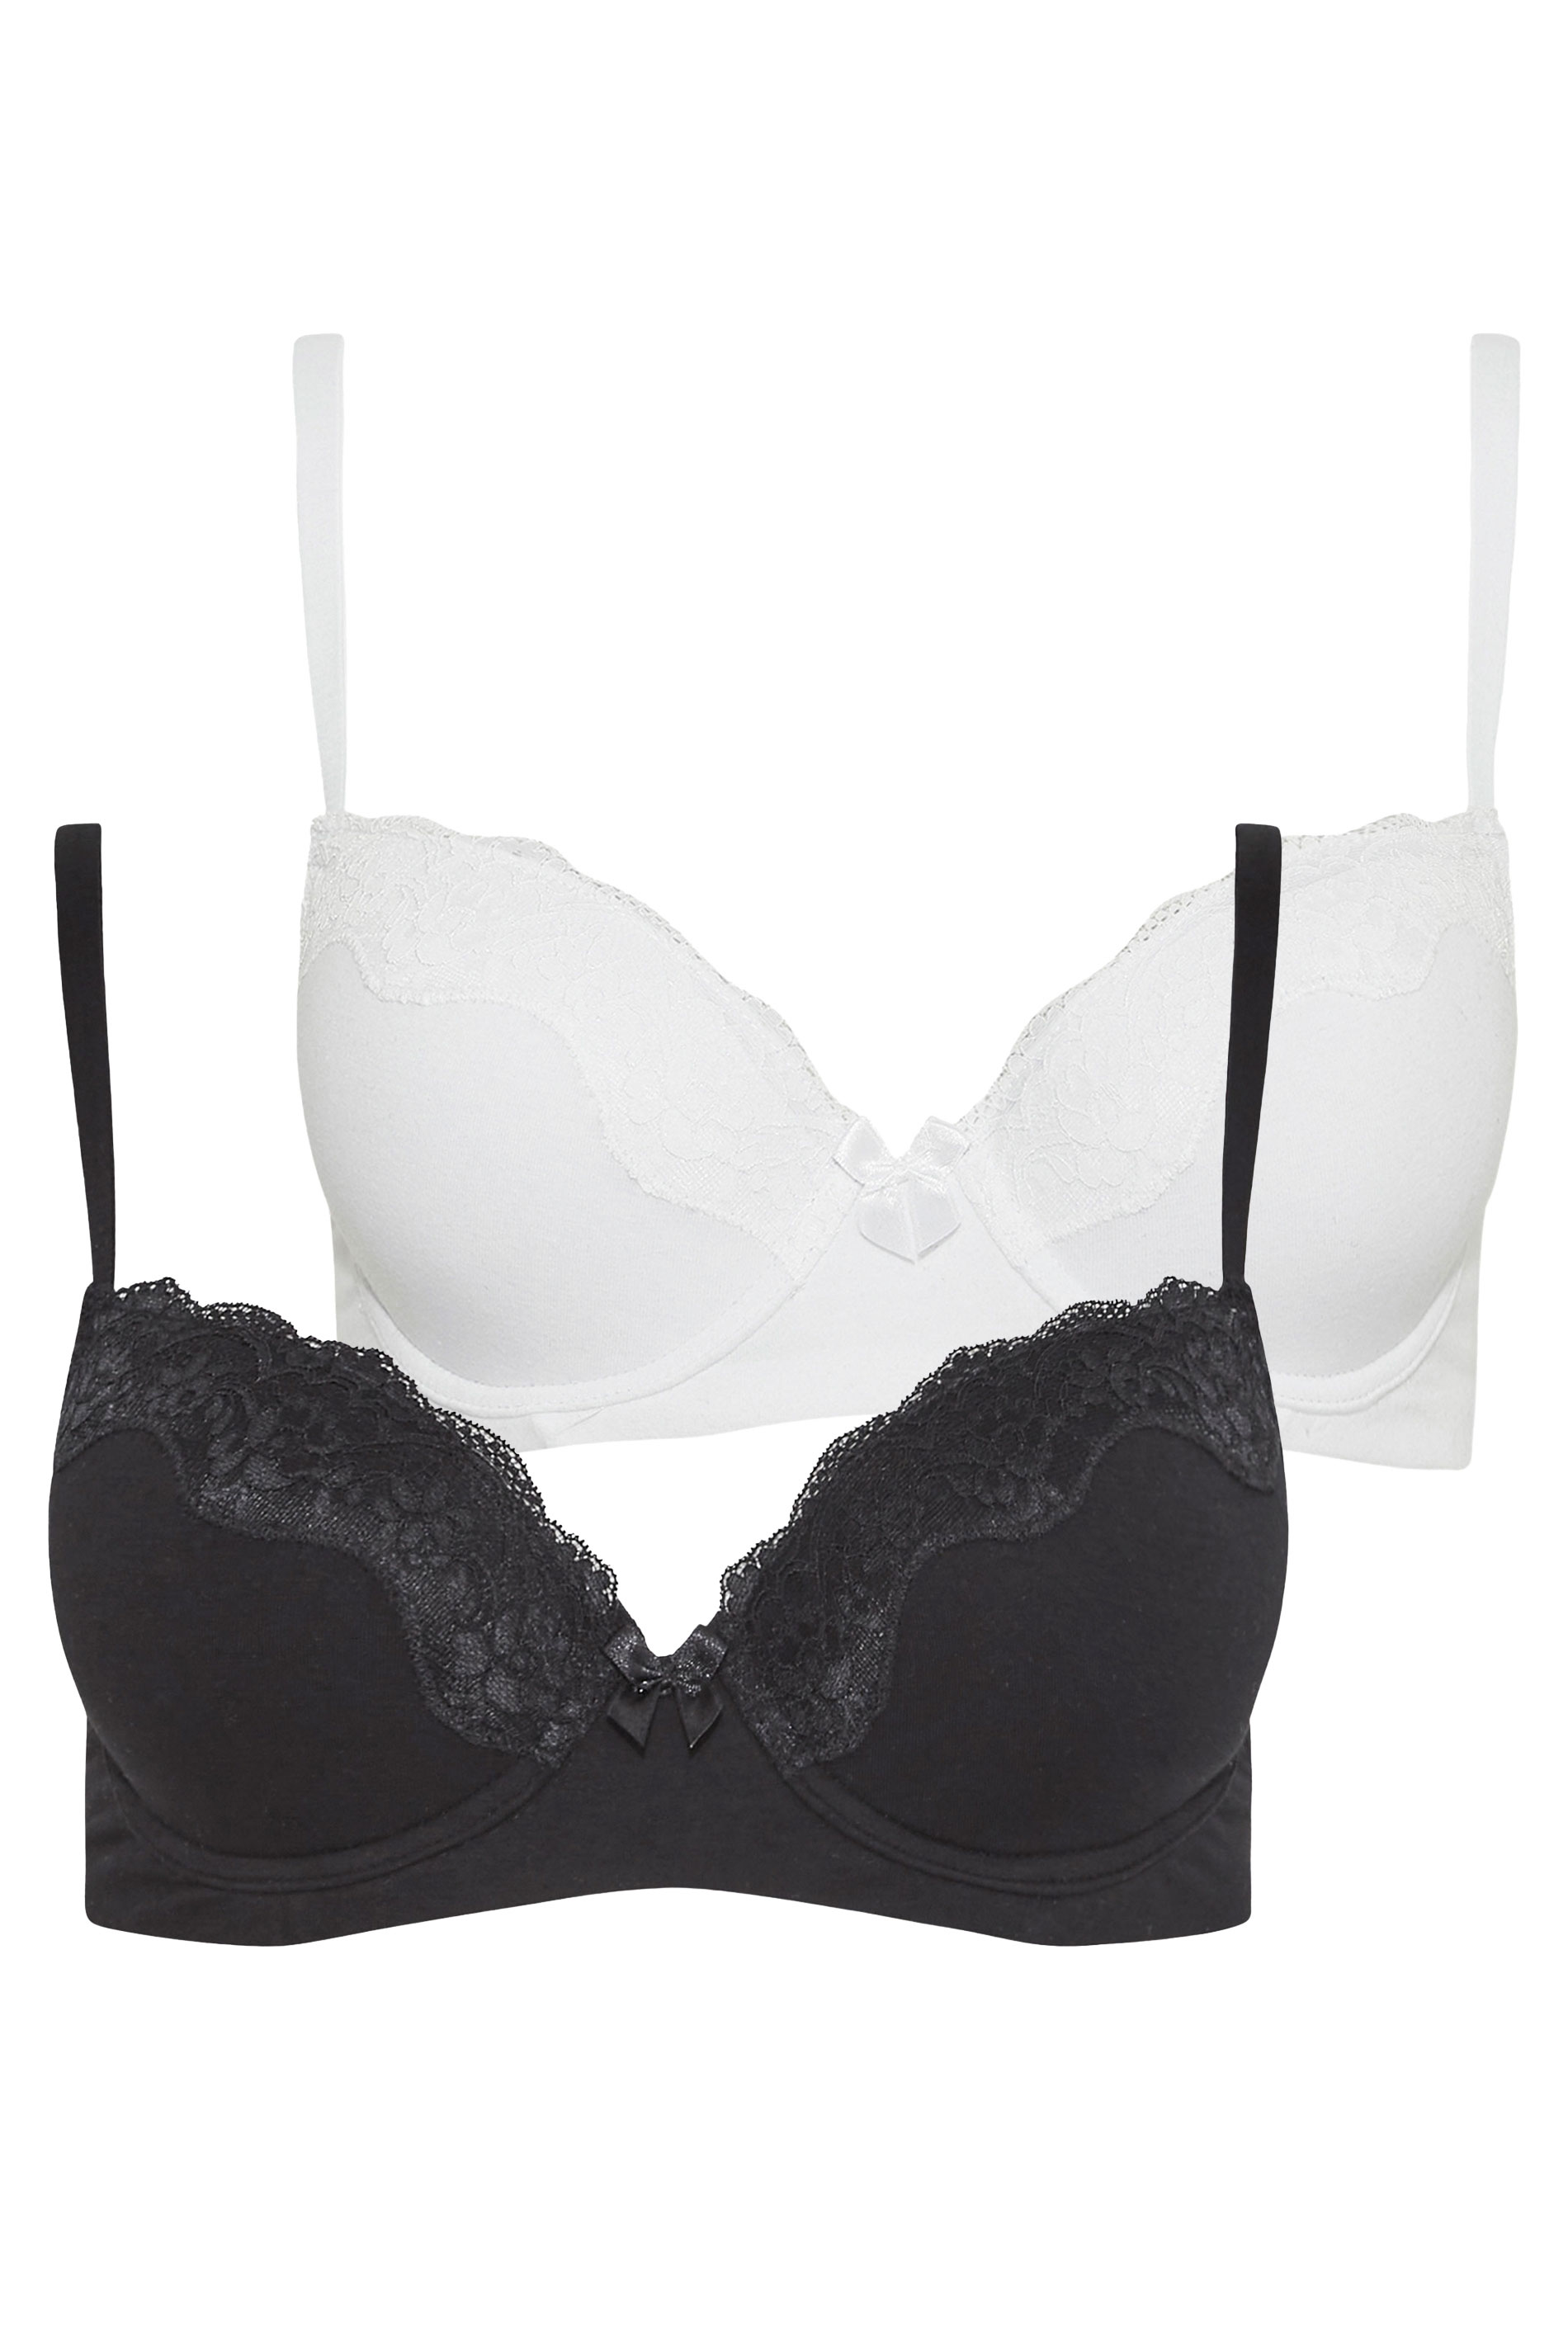 Matalan Black & White Underwired Evenly Padded Seam-Free T-Shirt Bras  2-Pack 40E